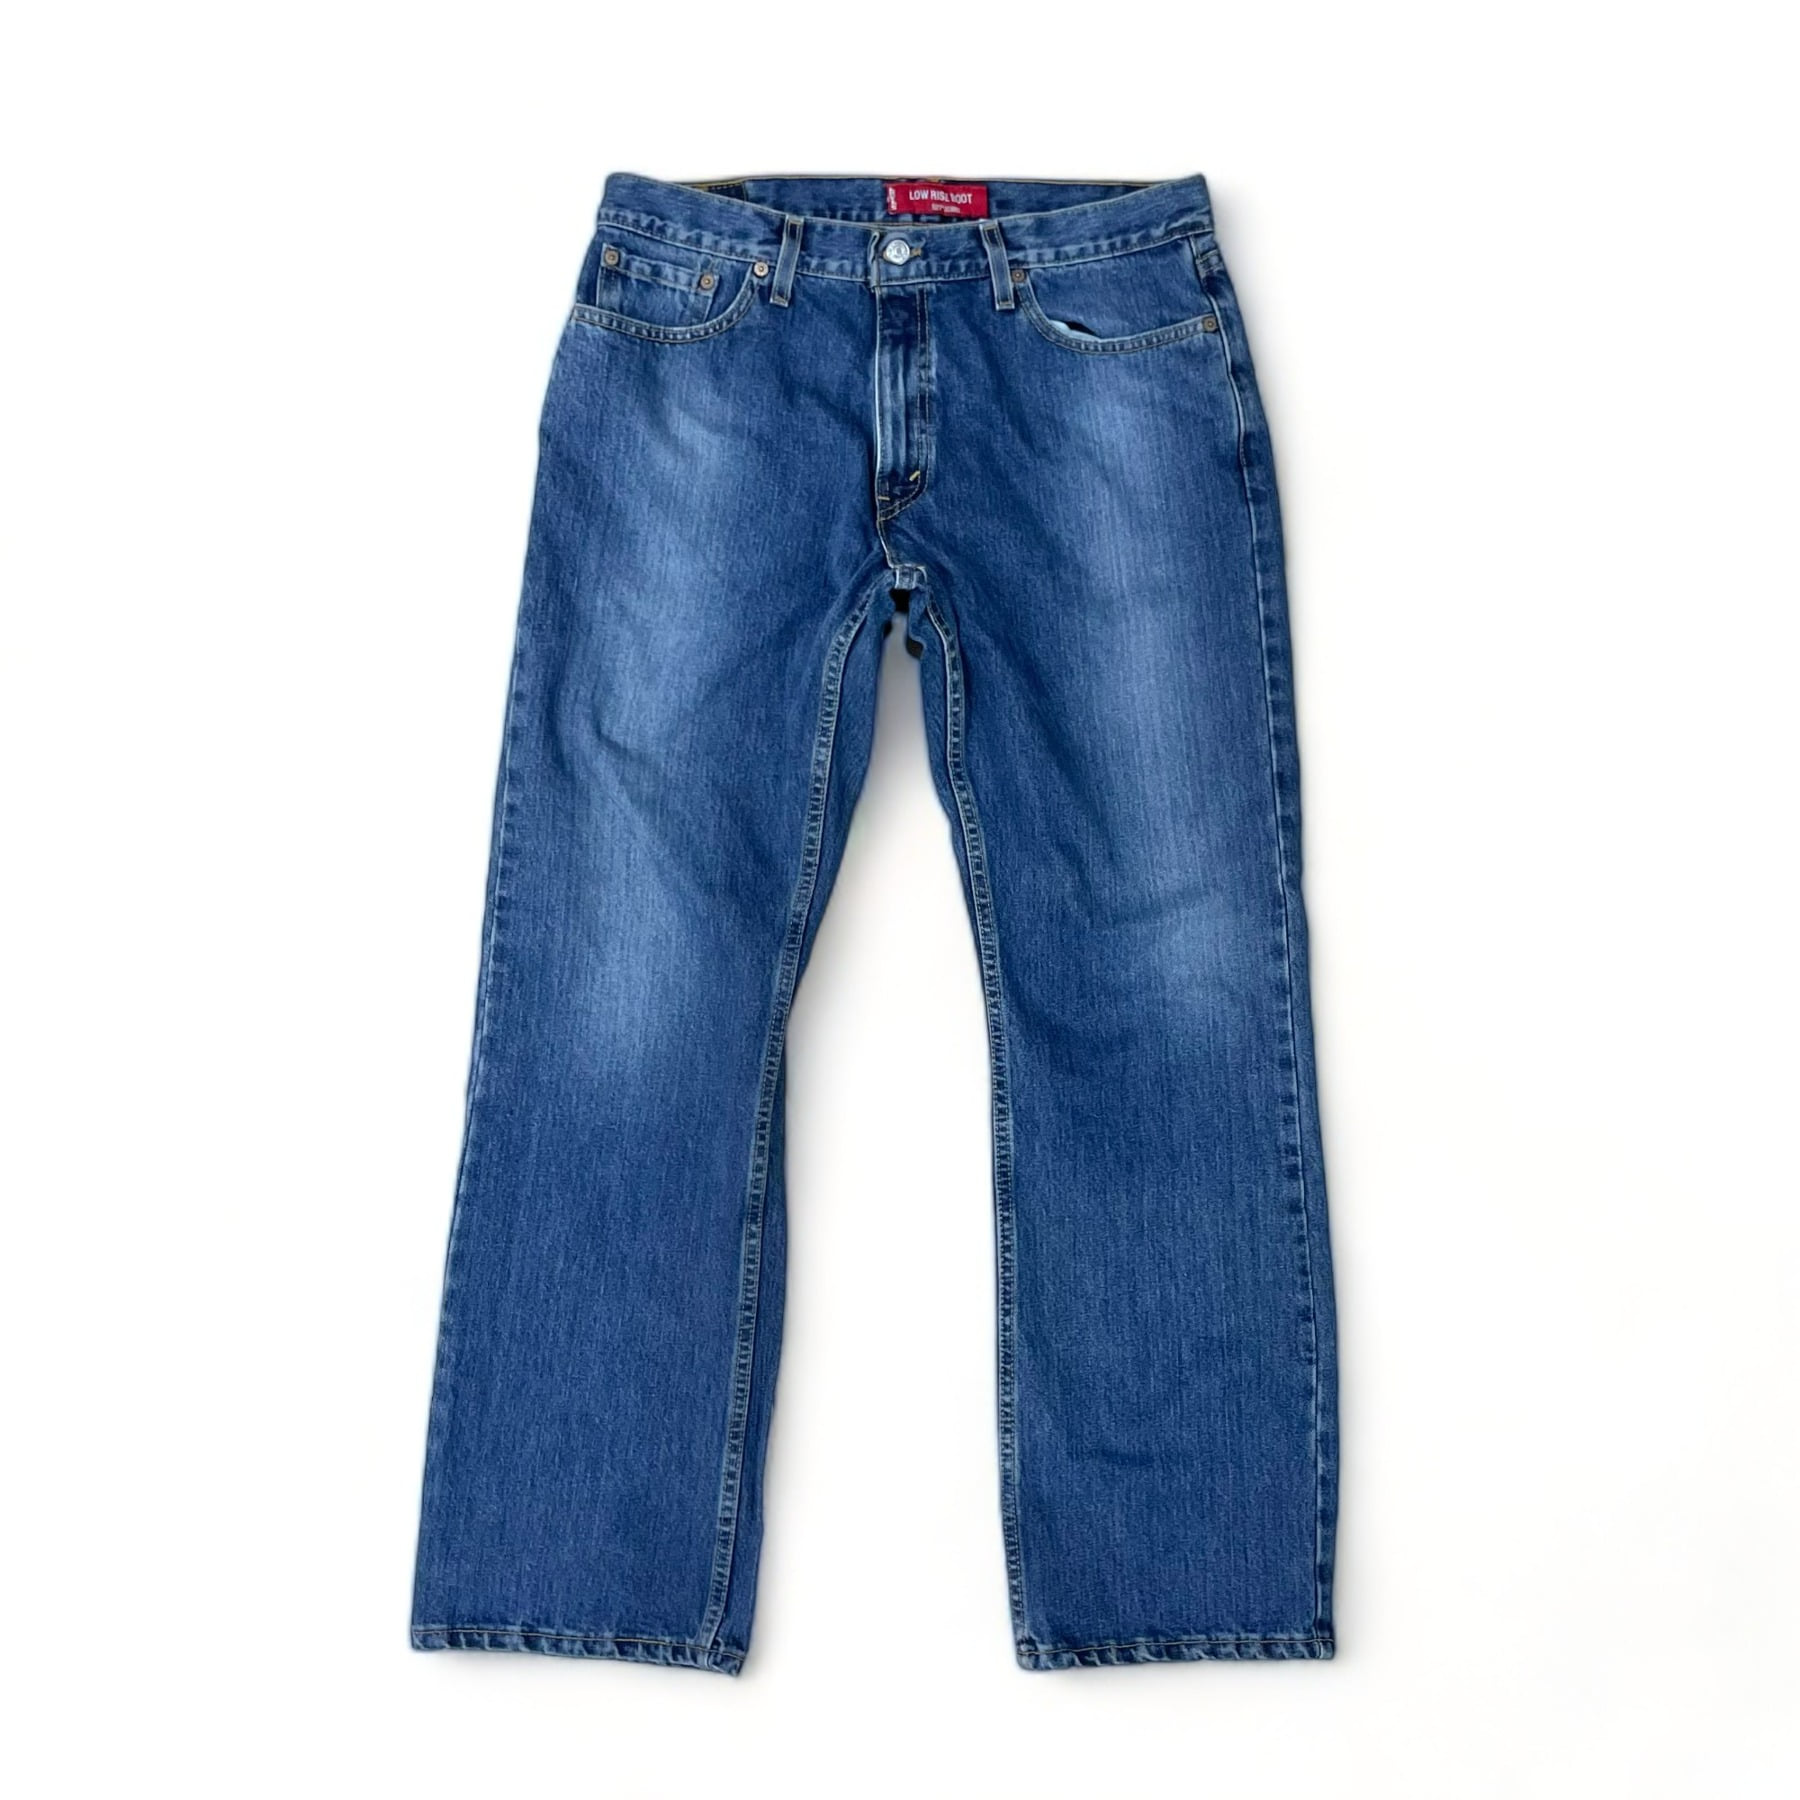 2002 Levis 527 (Made in USA) - 35inch